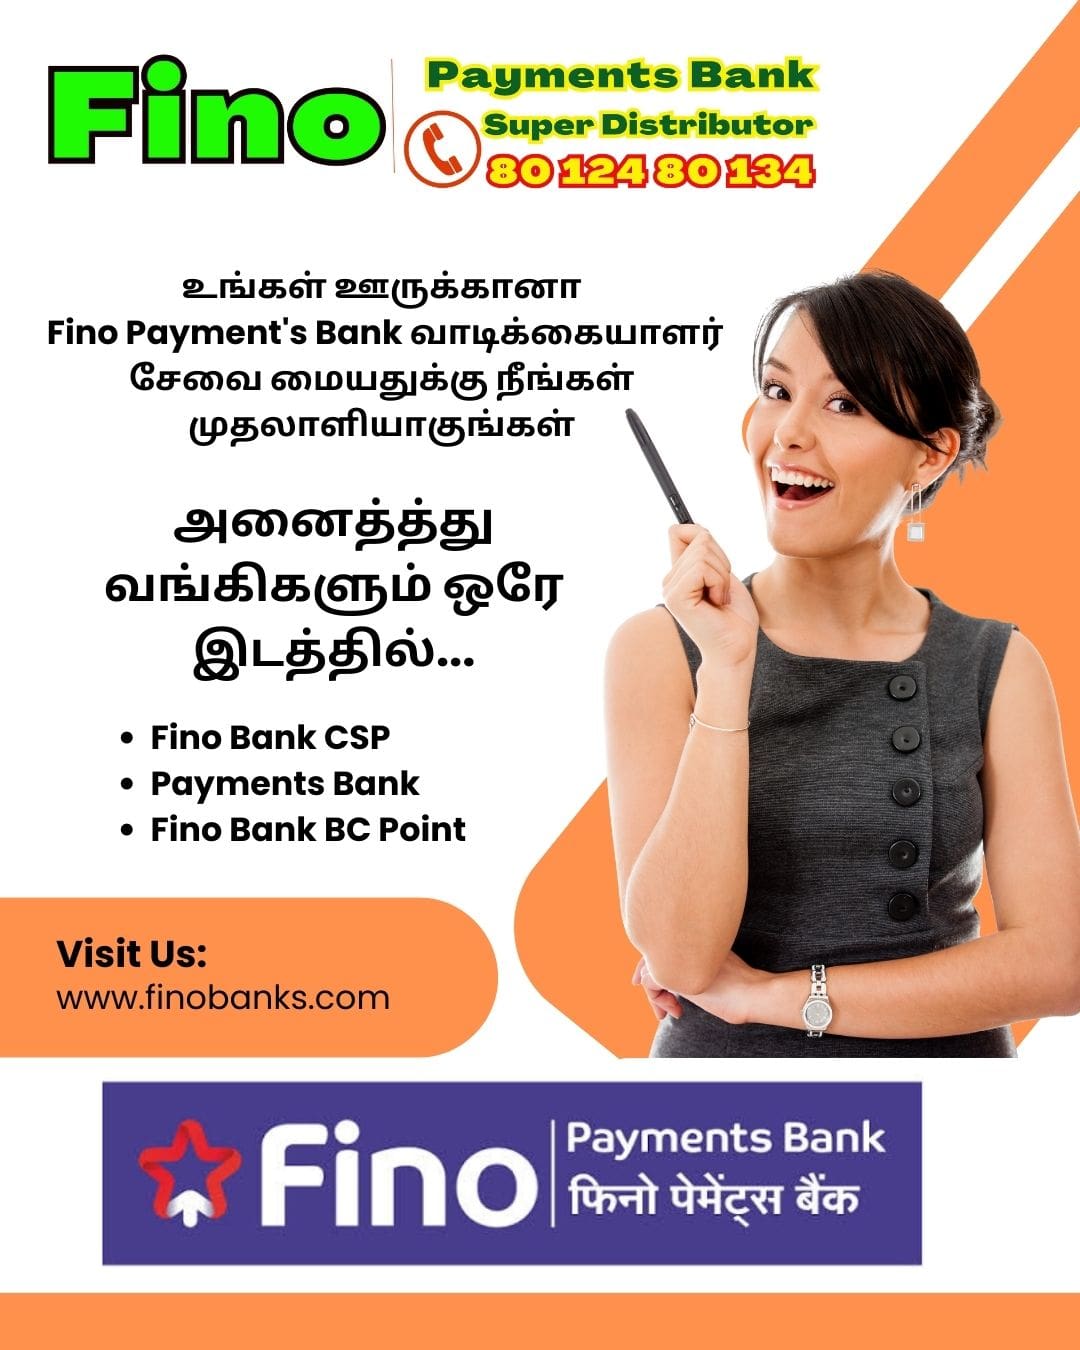 Bank ATM Payments Bank Loans jewel Gold Loan agriculture Loan